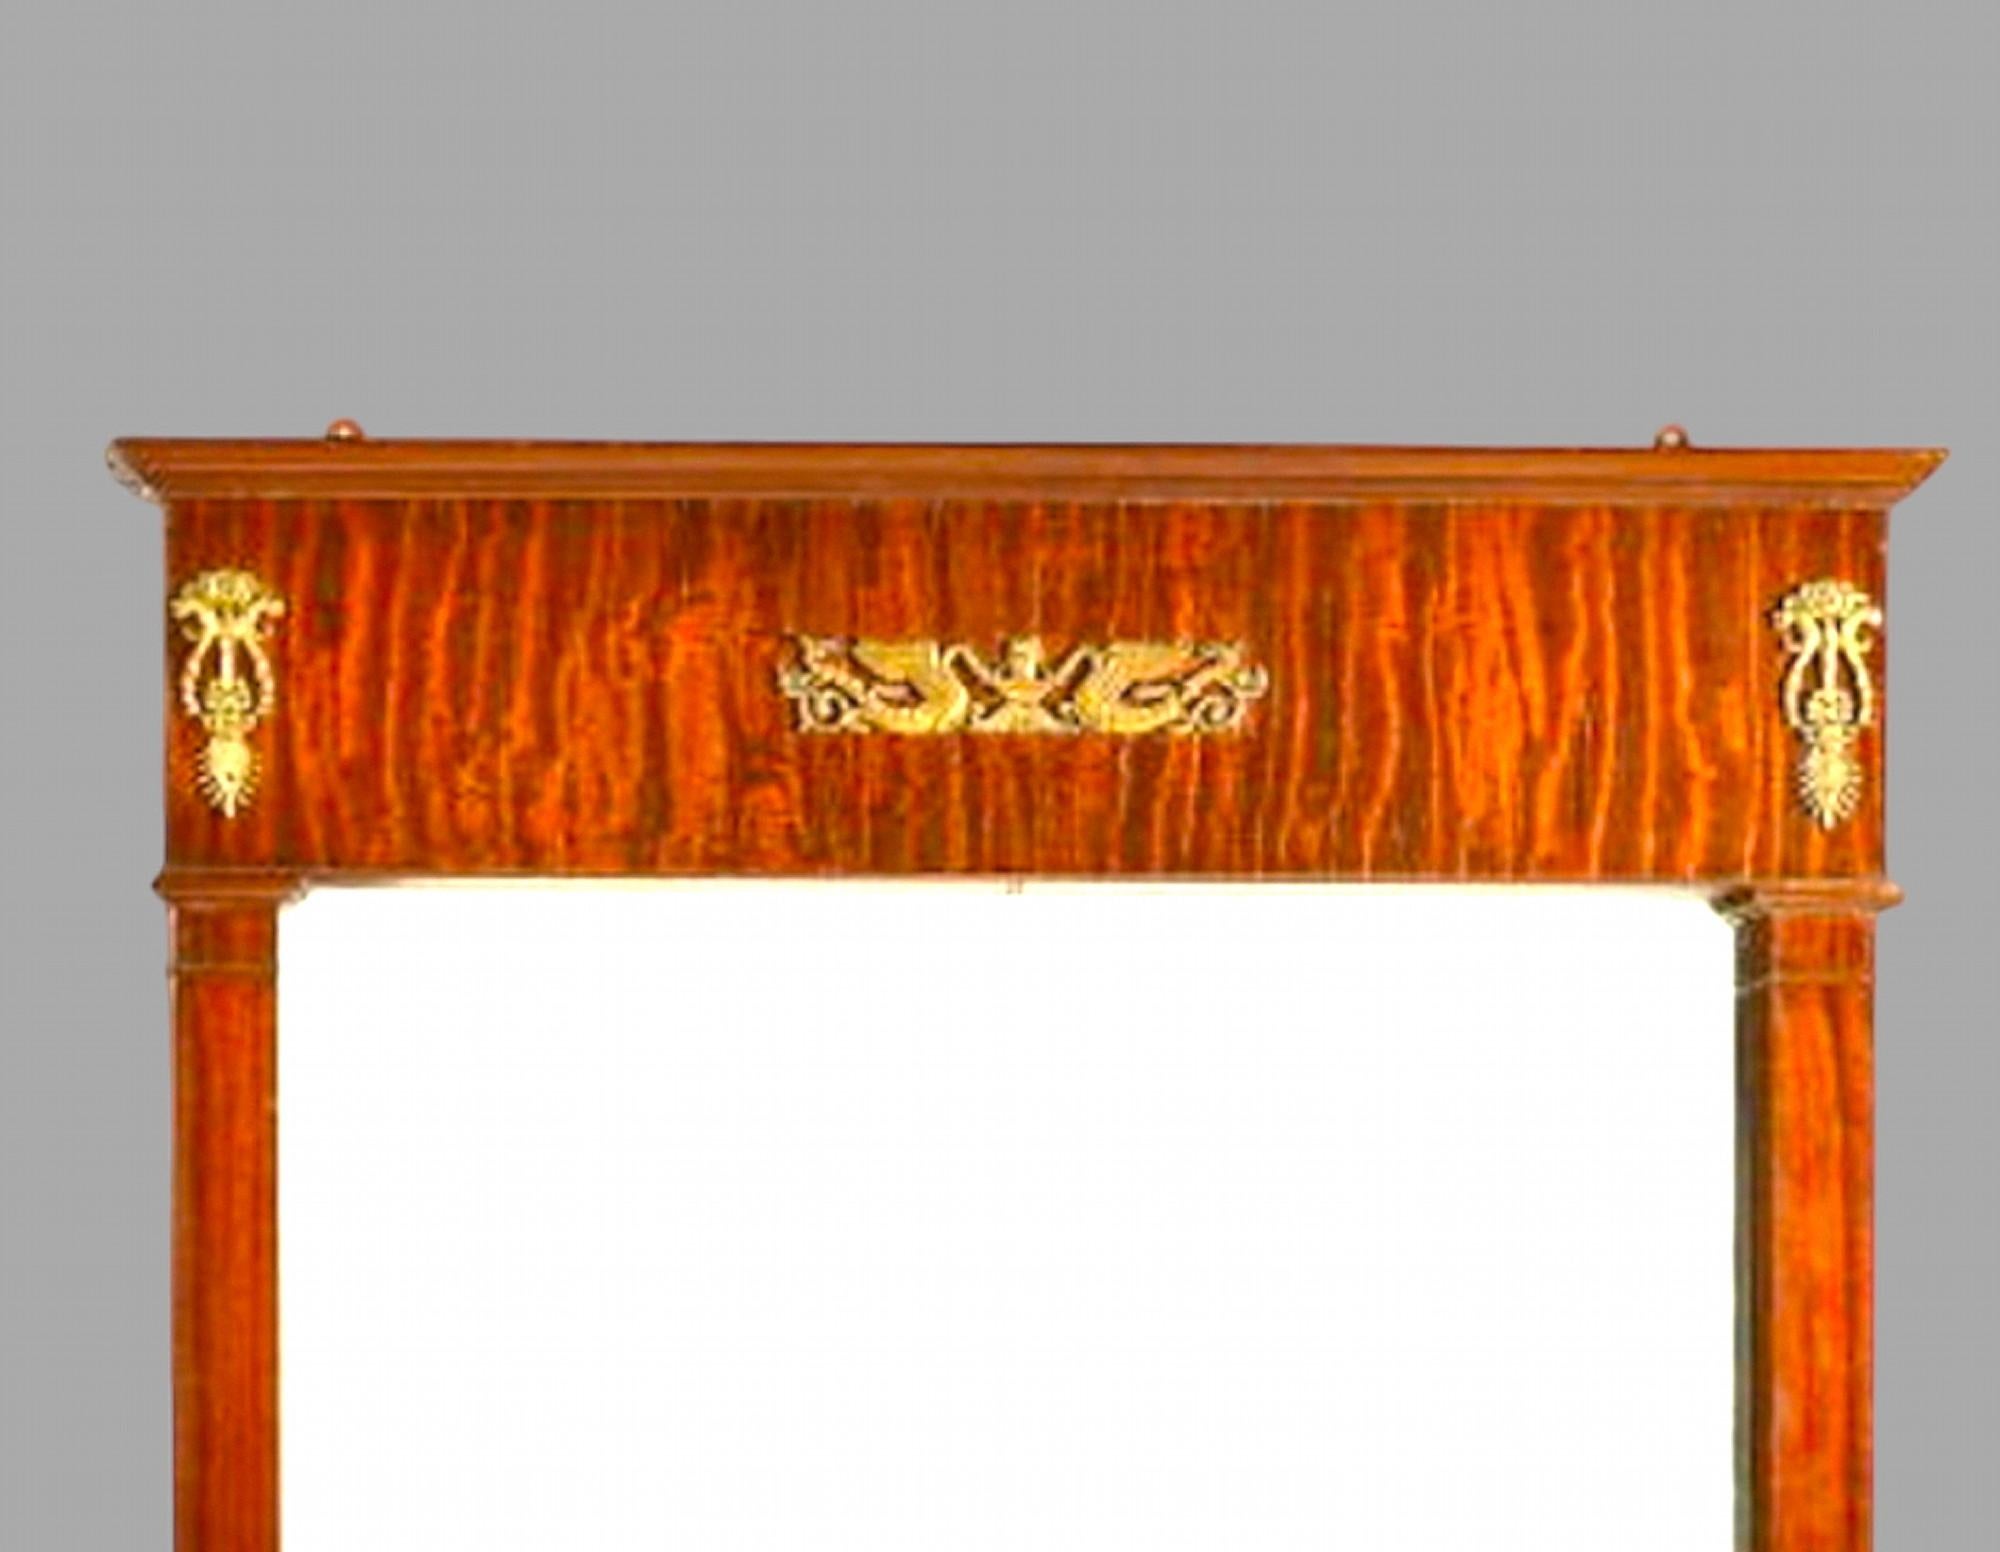 This is a large and imposing mahogany and gilt metal mounted wall mirror in the Empire taste, some aging to silvering of mirror plate as seen. Very heavy.

Length 167 cm and Width 123 cm with Depth 8 cm Total. Plate 134 cm x 100 cm